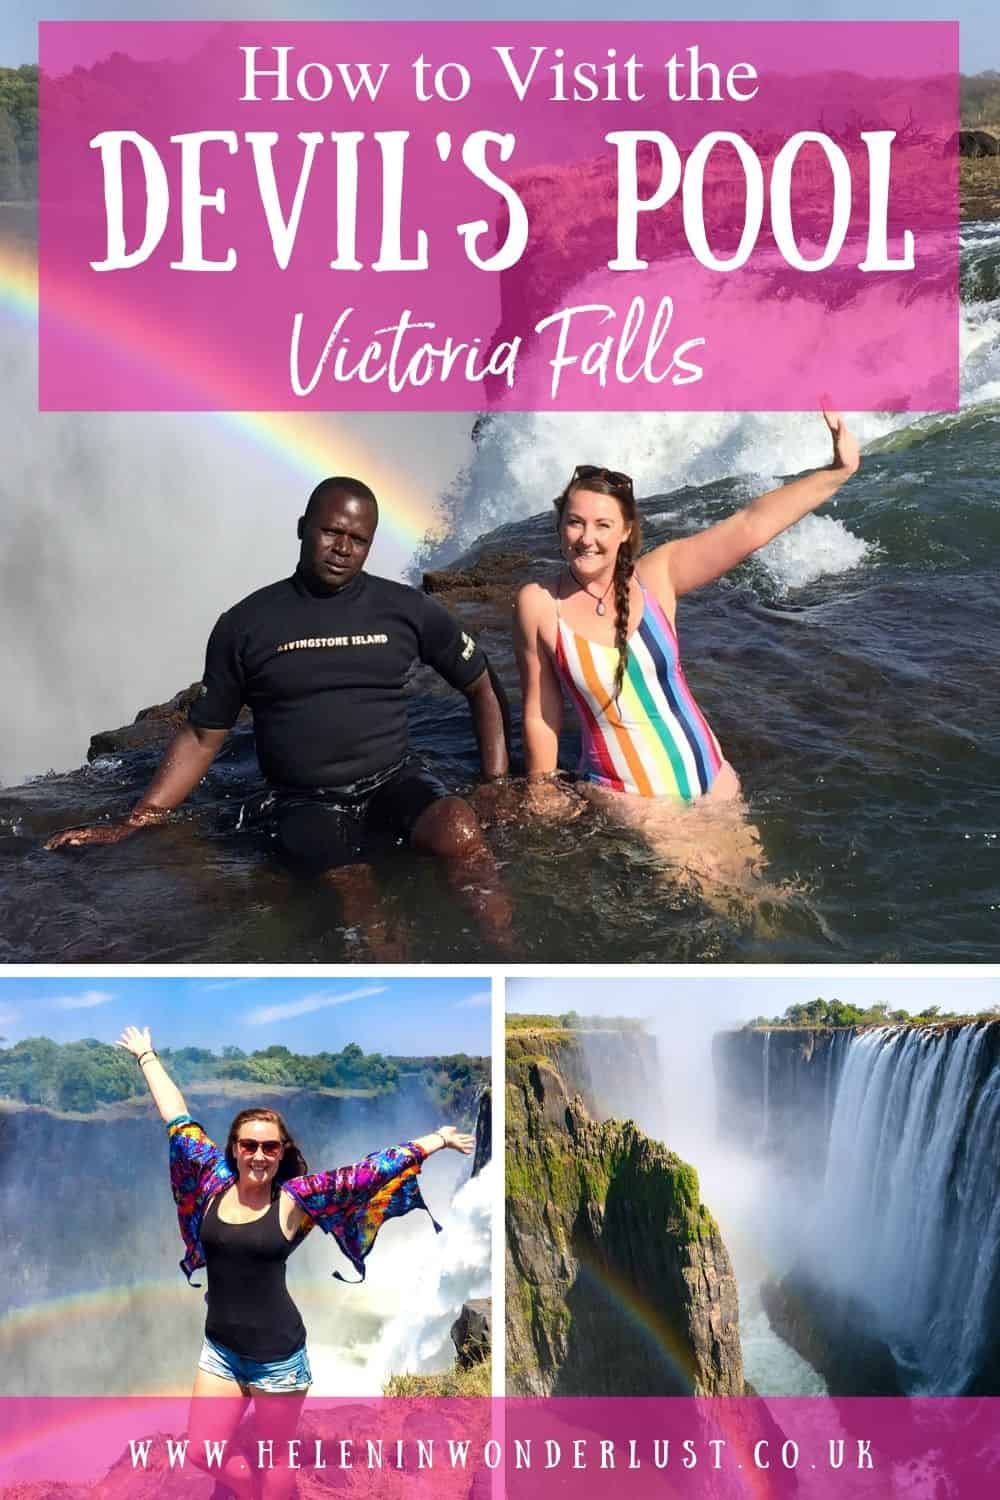 How to Visit the Devil's Pool Victoria Falls, Zambia